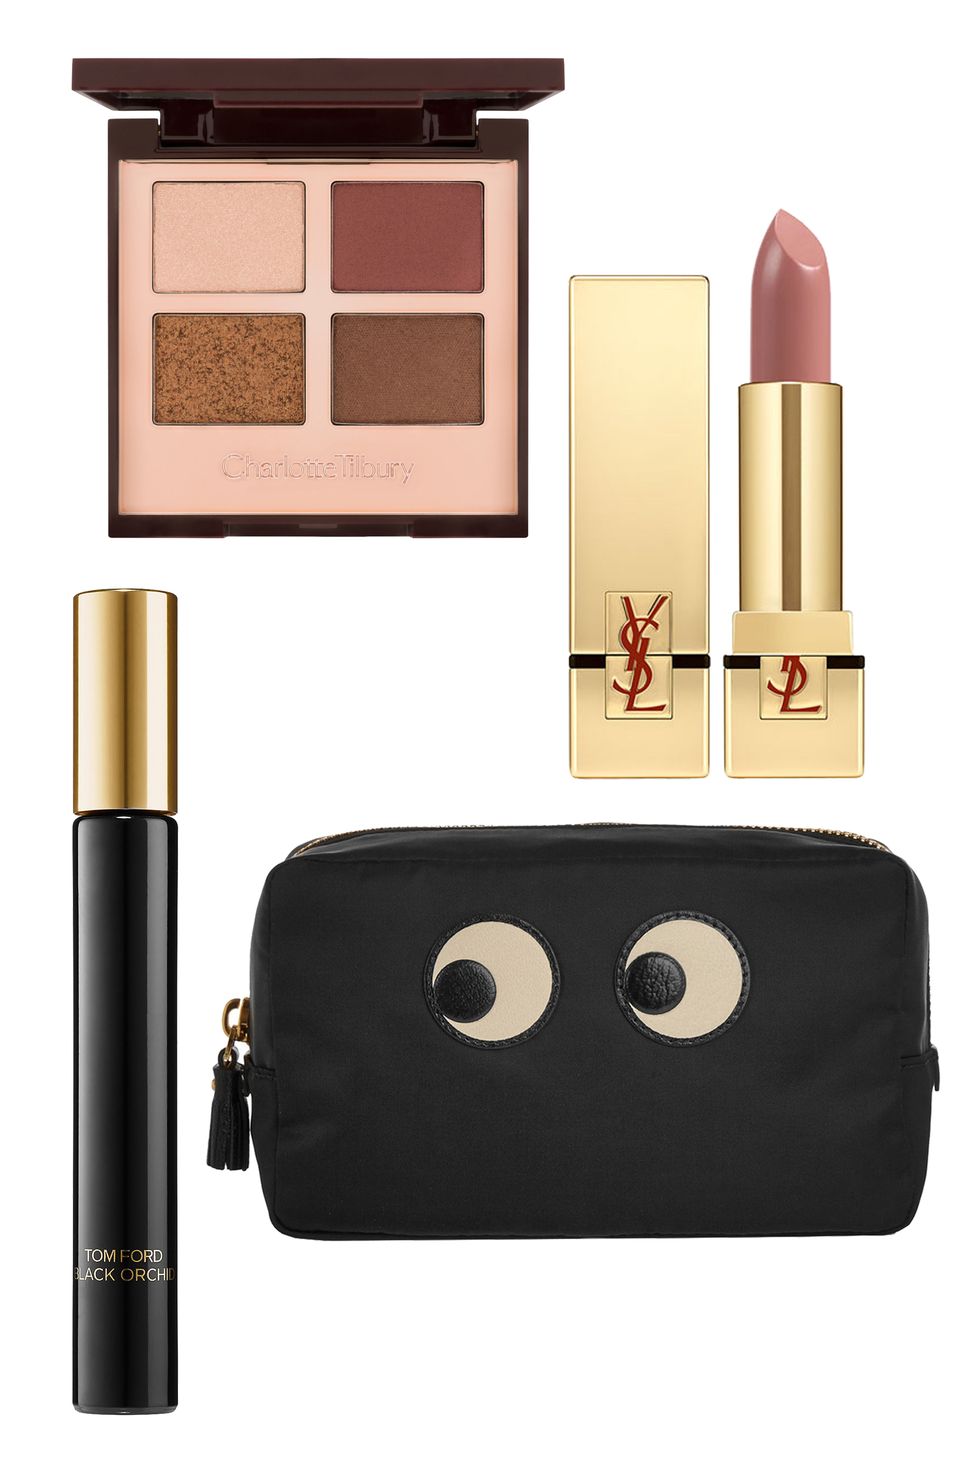 <p>Quite possibly the cutest way to tote your makeup must-haves. <em>Anya Hindmarch Eyes Textured Leather-Trimmed Cosmetics Case, $375, <strong><a href="https://www.net-a-porter.com/us/en/product/657570/Anya_Hindmarch/eyes-textured-leather-trimmed-cosmetics-case" target="_blank">netaporter.com</a>;</strong> </em><em>Tom Ford Black Orchid Rollerball, $45, <strong><a href="http://www.sephora.com/black-orchid-rollerball-P405428?skuId=1795343" target="_blank">sephora.com</a>;</strong> </em><em>Charlotte Tilbury Luxury Eyeshadow Palette in The Dolce Vita, $52, <strong><a href="http://shop.nordstrom.com/s/charlotte-tilbury-luxury-palette-colour-coded-eyeshadow-palette/3849074?origin=category-personalizedsort&contextualcategoryid=0&fashionColor=&resultback=3123" target="_blank">nordstrom.com</a>; </strong></em><em>Yves Saint Laurent Satin Radiance Lipstick in Delicate Nude Pink, $37, <a href="http://www.sephora.com/rouge-pur-couture-satin-radiance-lipstick-P272319?skuId=1293489" target="_blank"><strong>sephora.com</strong></a>. </em></p>